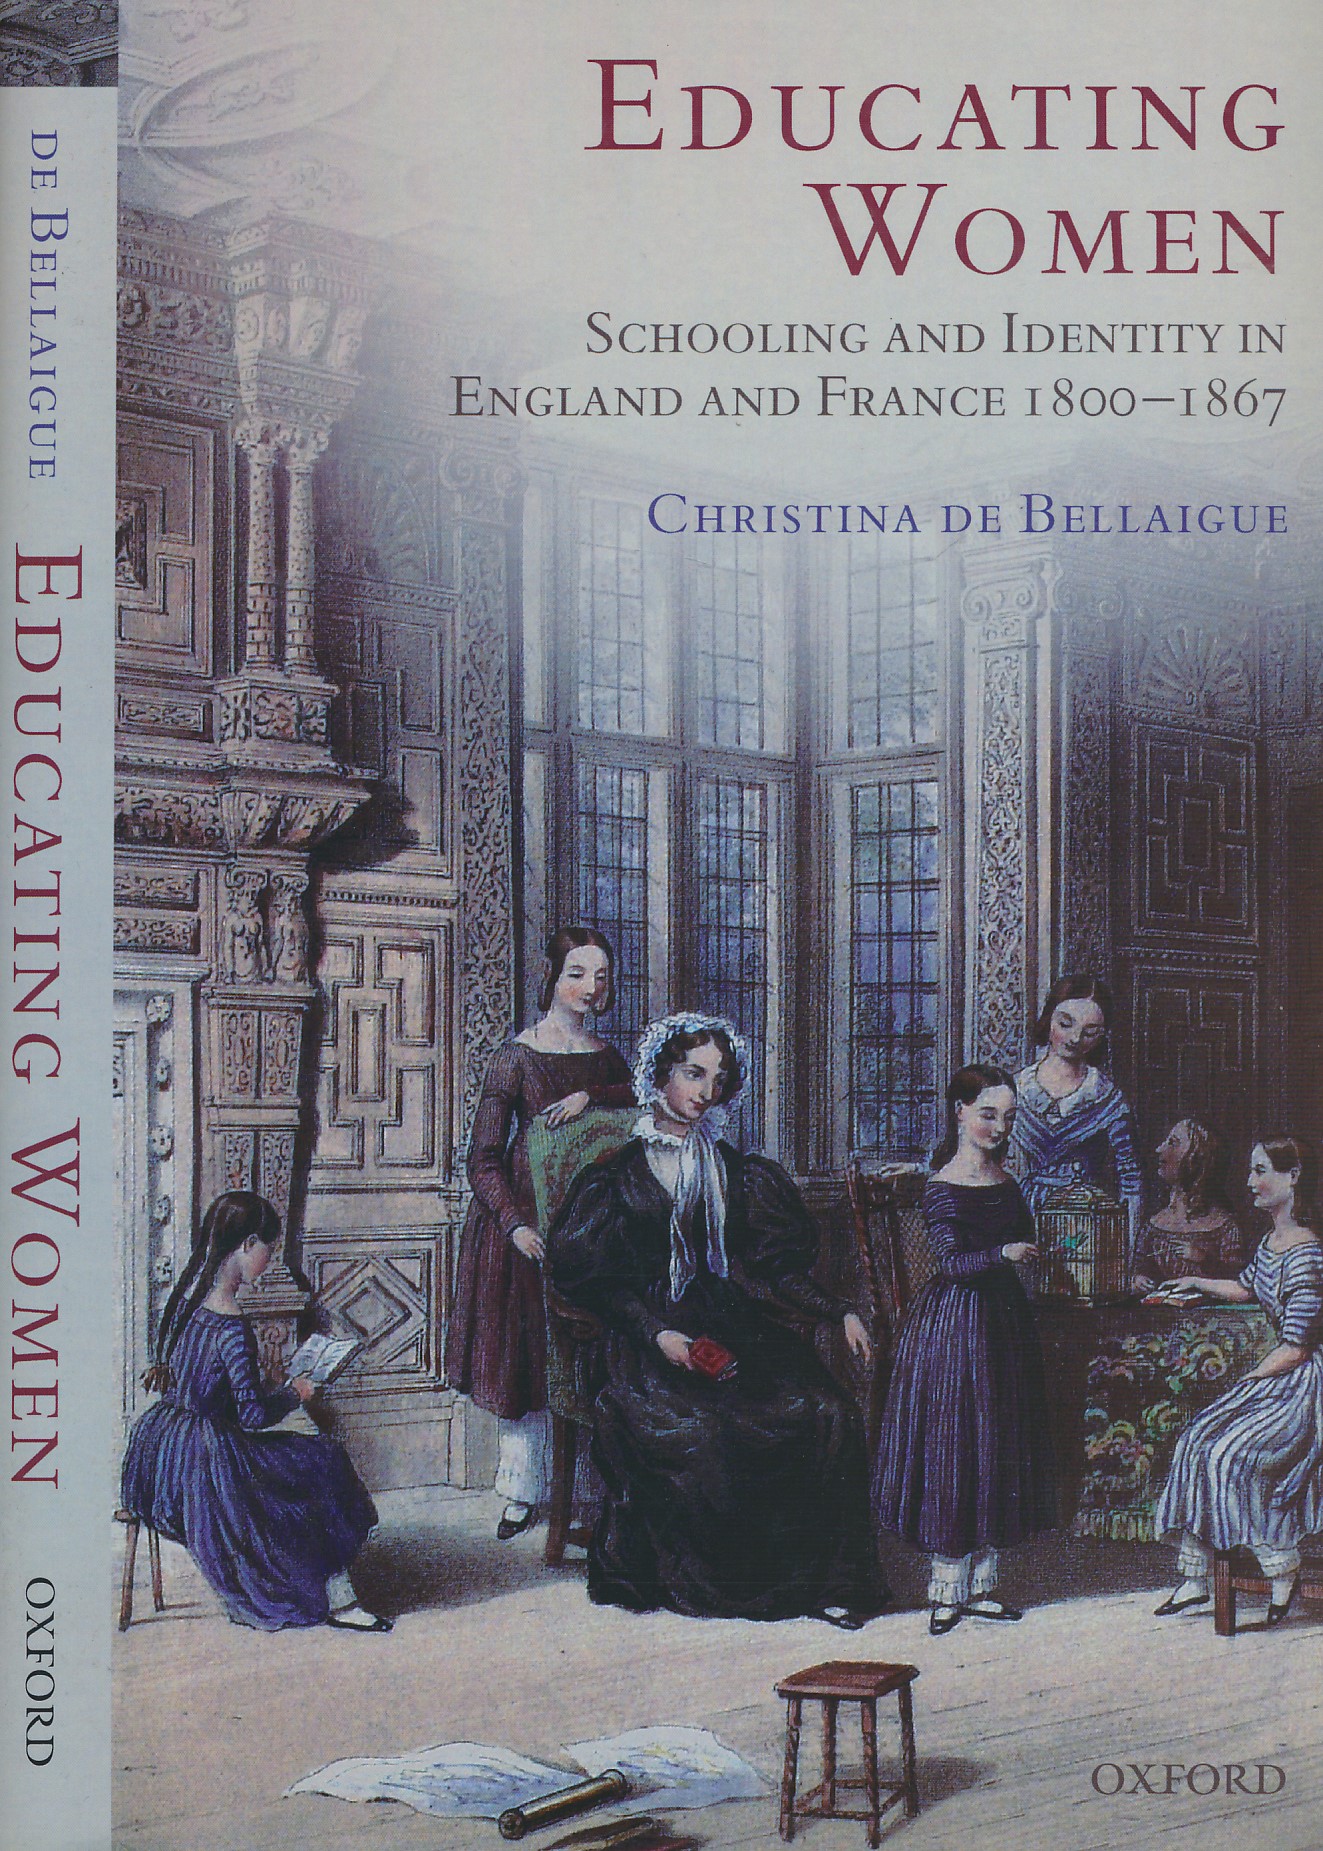 Educating Women. Schooling and Identity in England and France 1800 - 1867